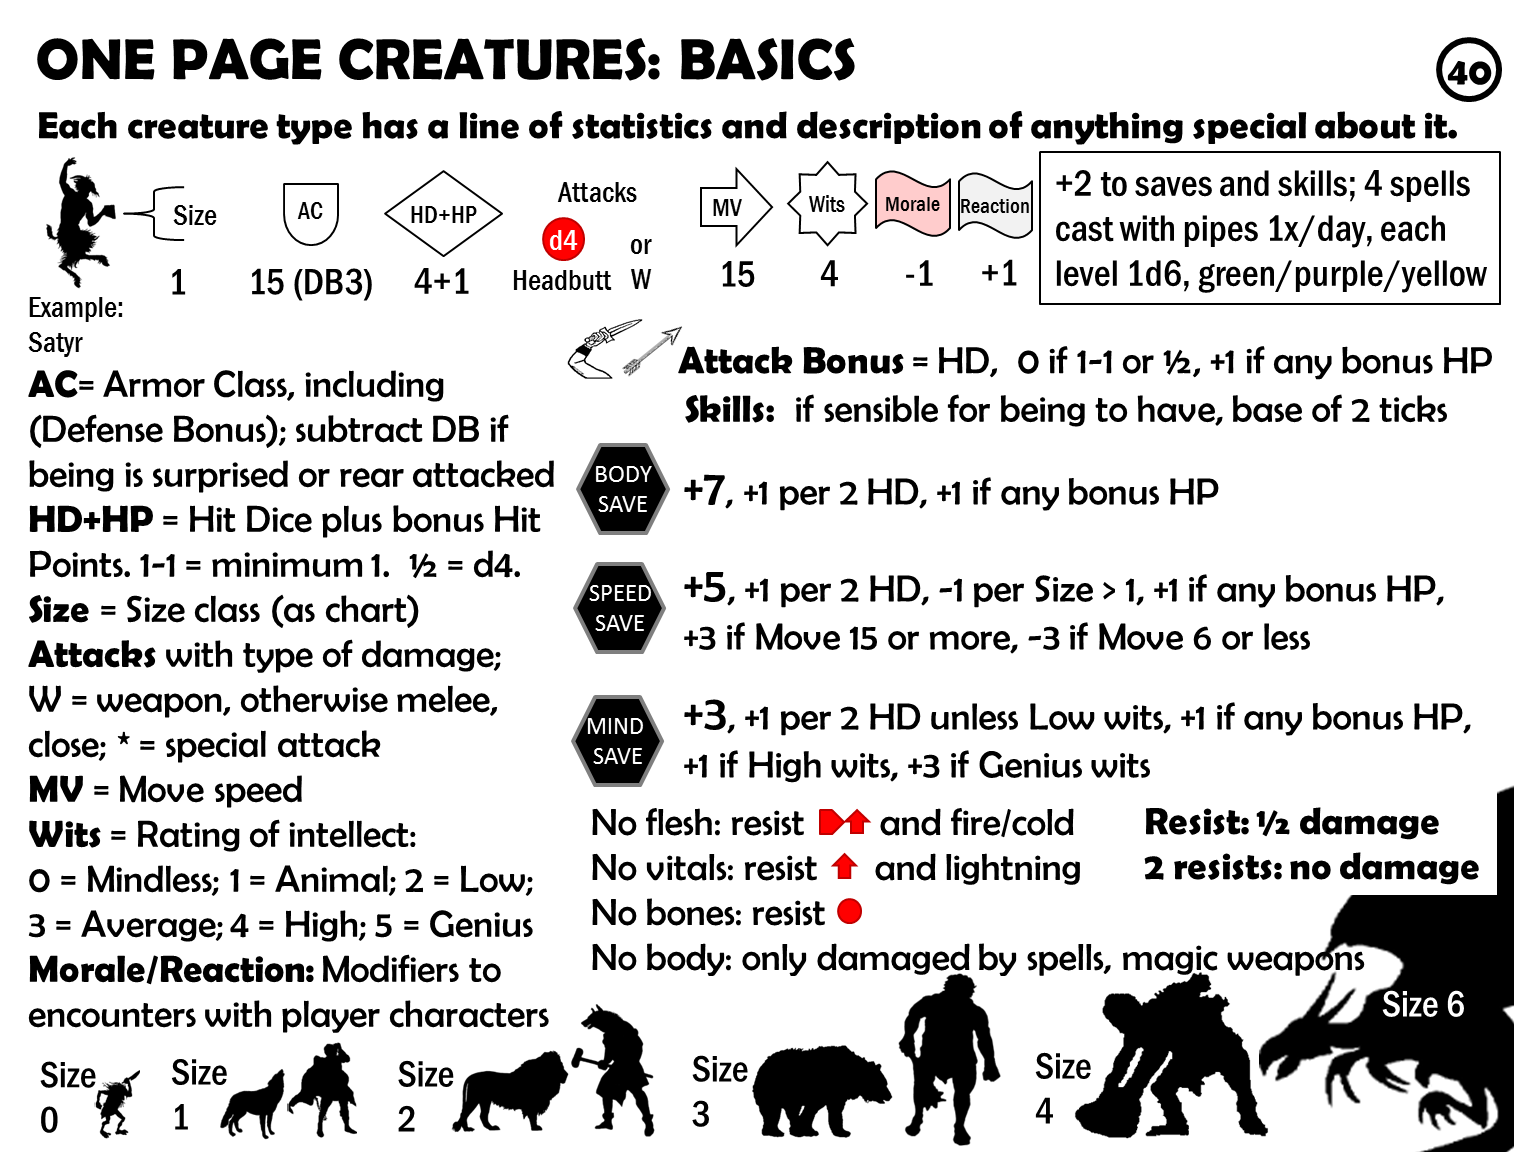 One+Page+Creatures+Basics.png